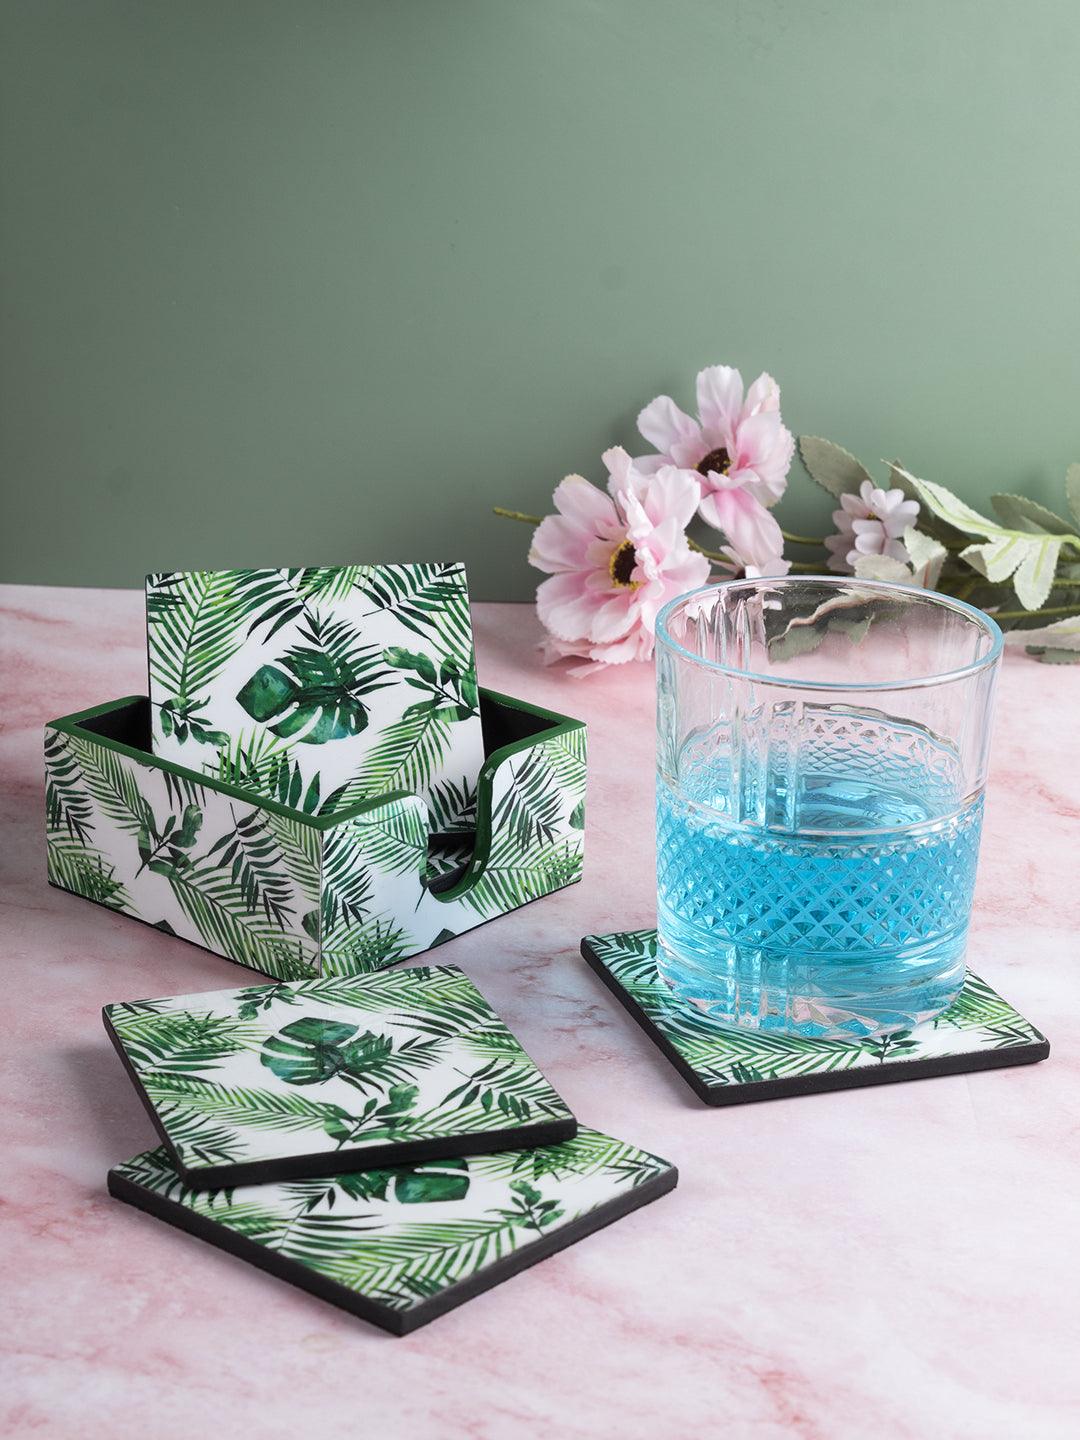 Market99 Coaster with Holder, Nature Inspired Print, Tea Coaster, with Soft Bottom for Home, Office, & Restaurant, Green Colour, MDF, Set of 6 - MARKET 99